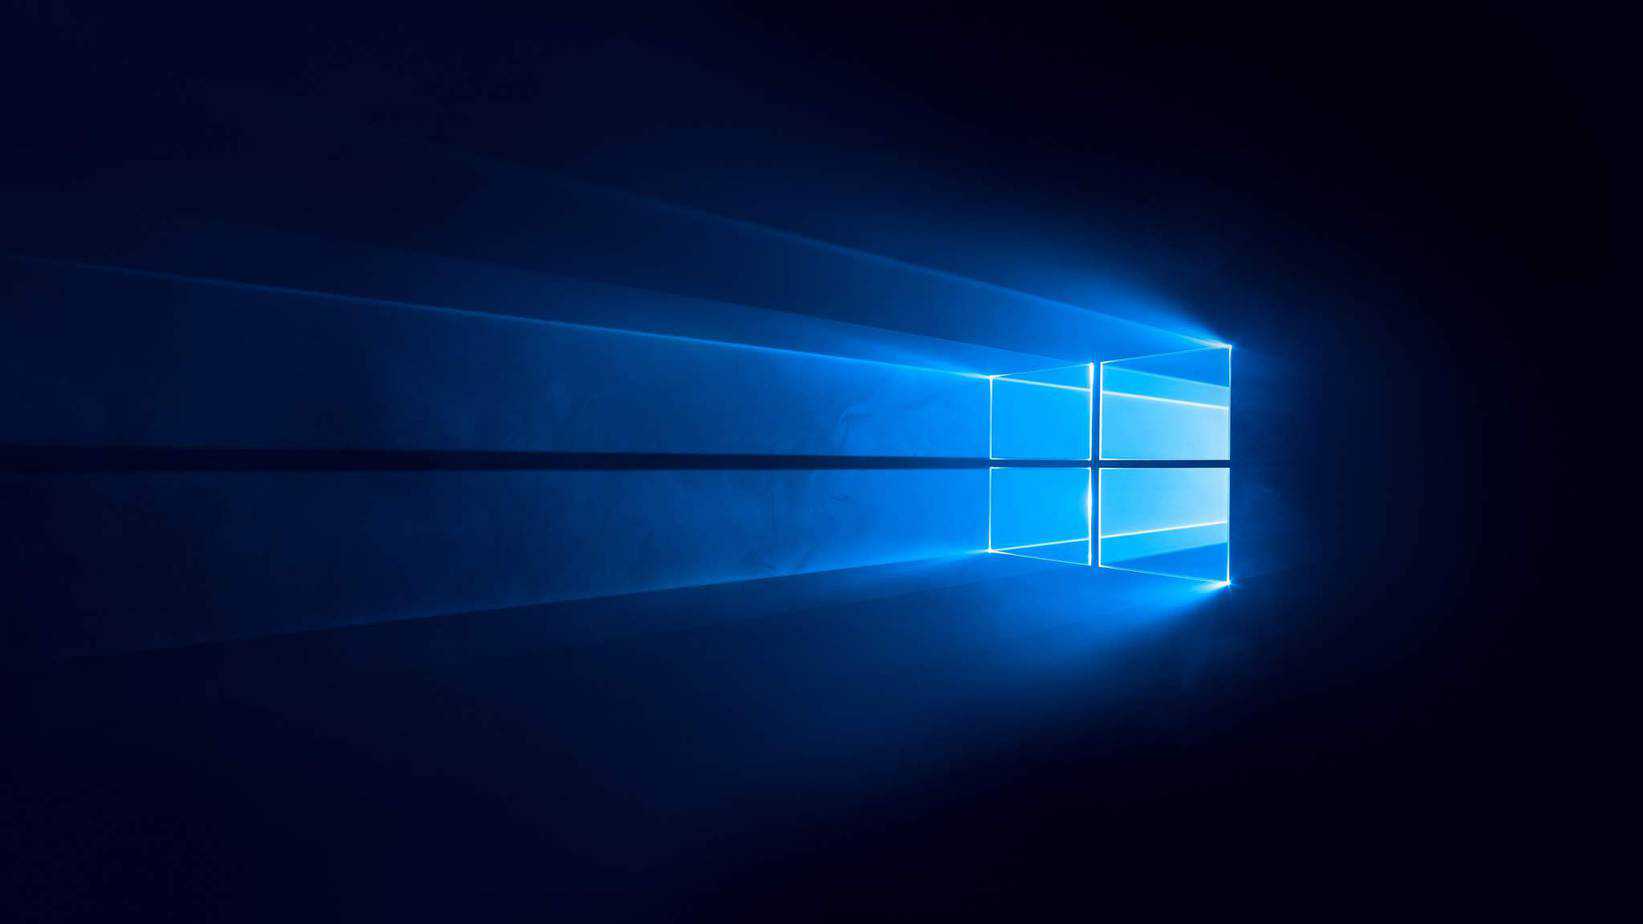 What's new in Windows 10 Update 21H2 (KB5005611)